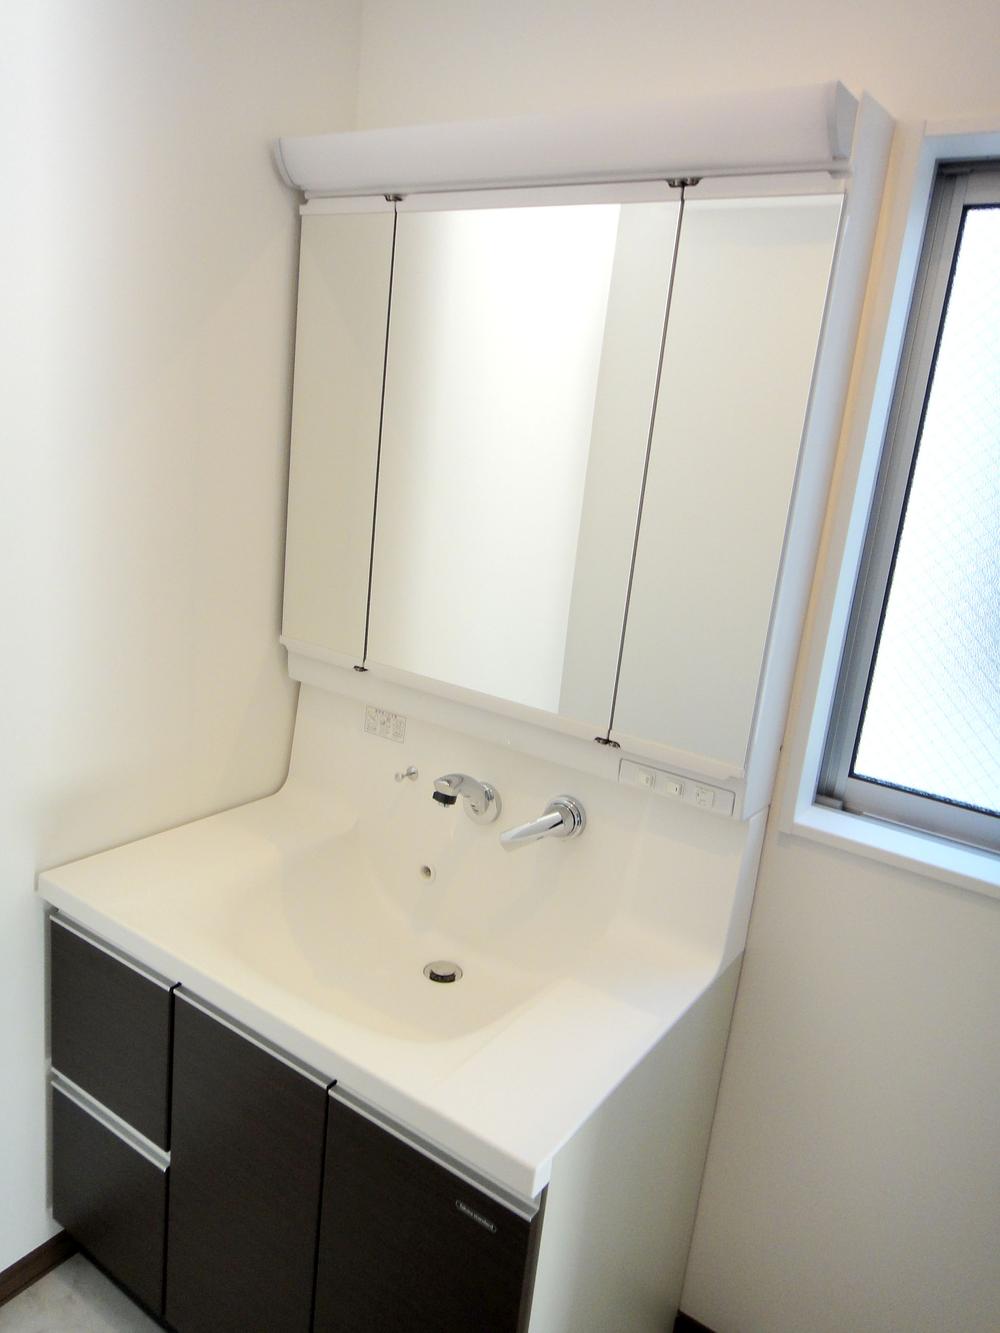 Same specifications photos (Other introspection). Sold dwelling unit ・ Washroom